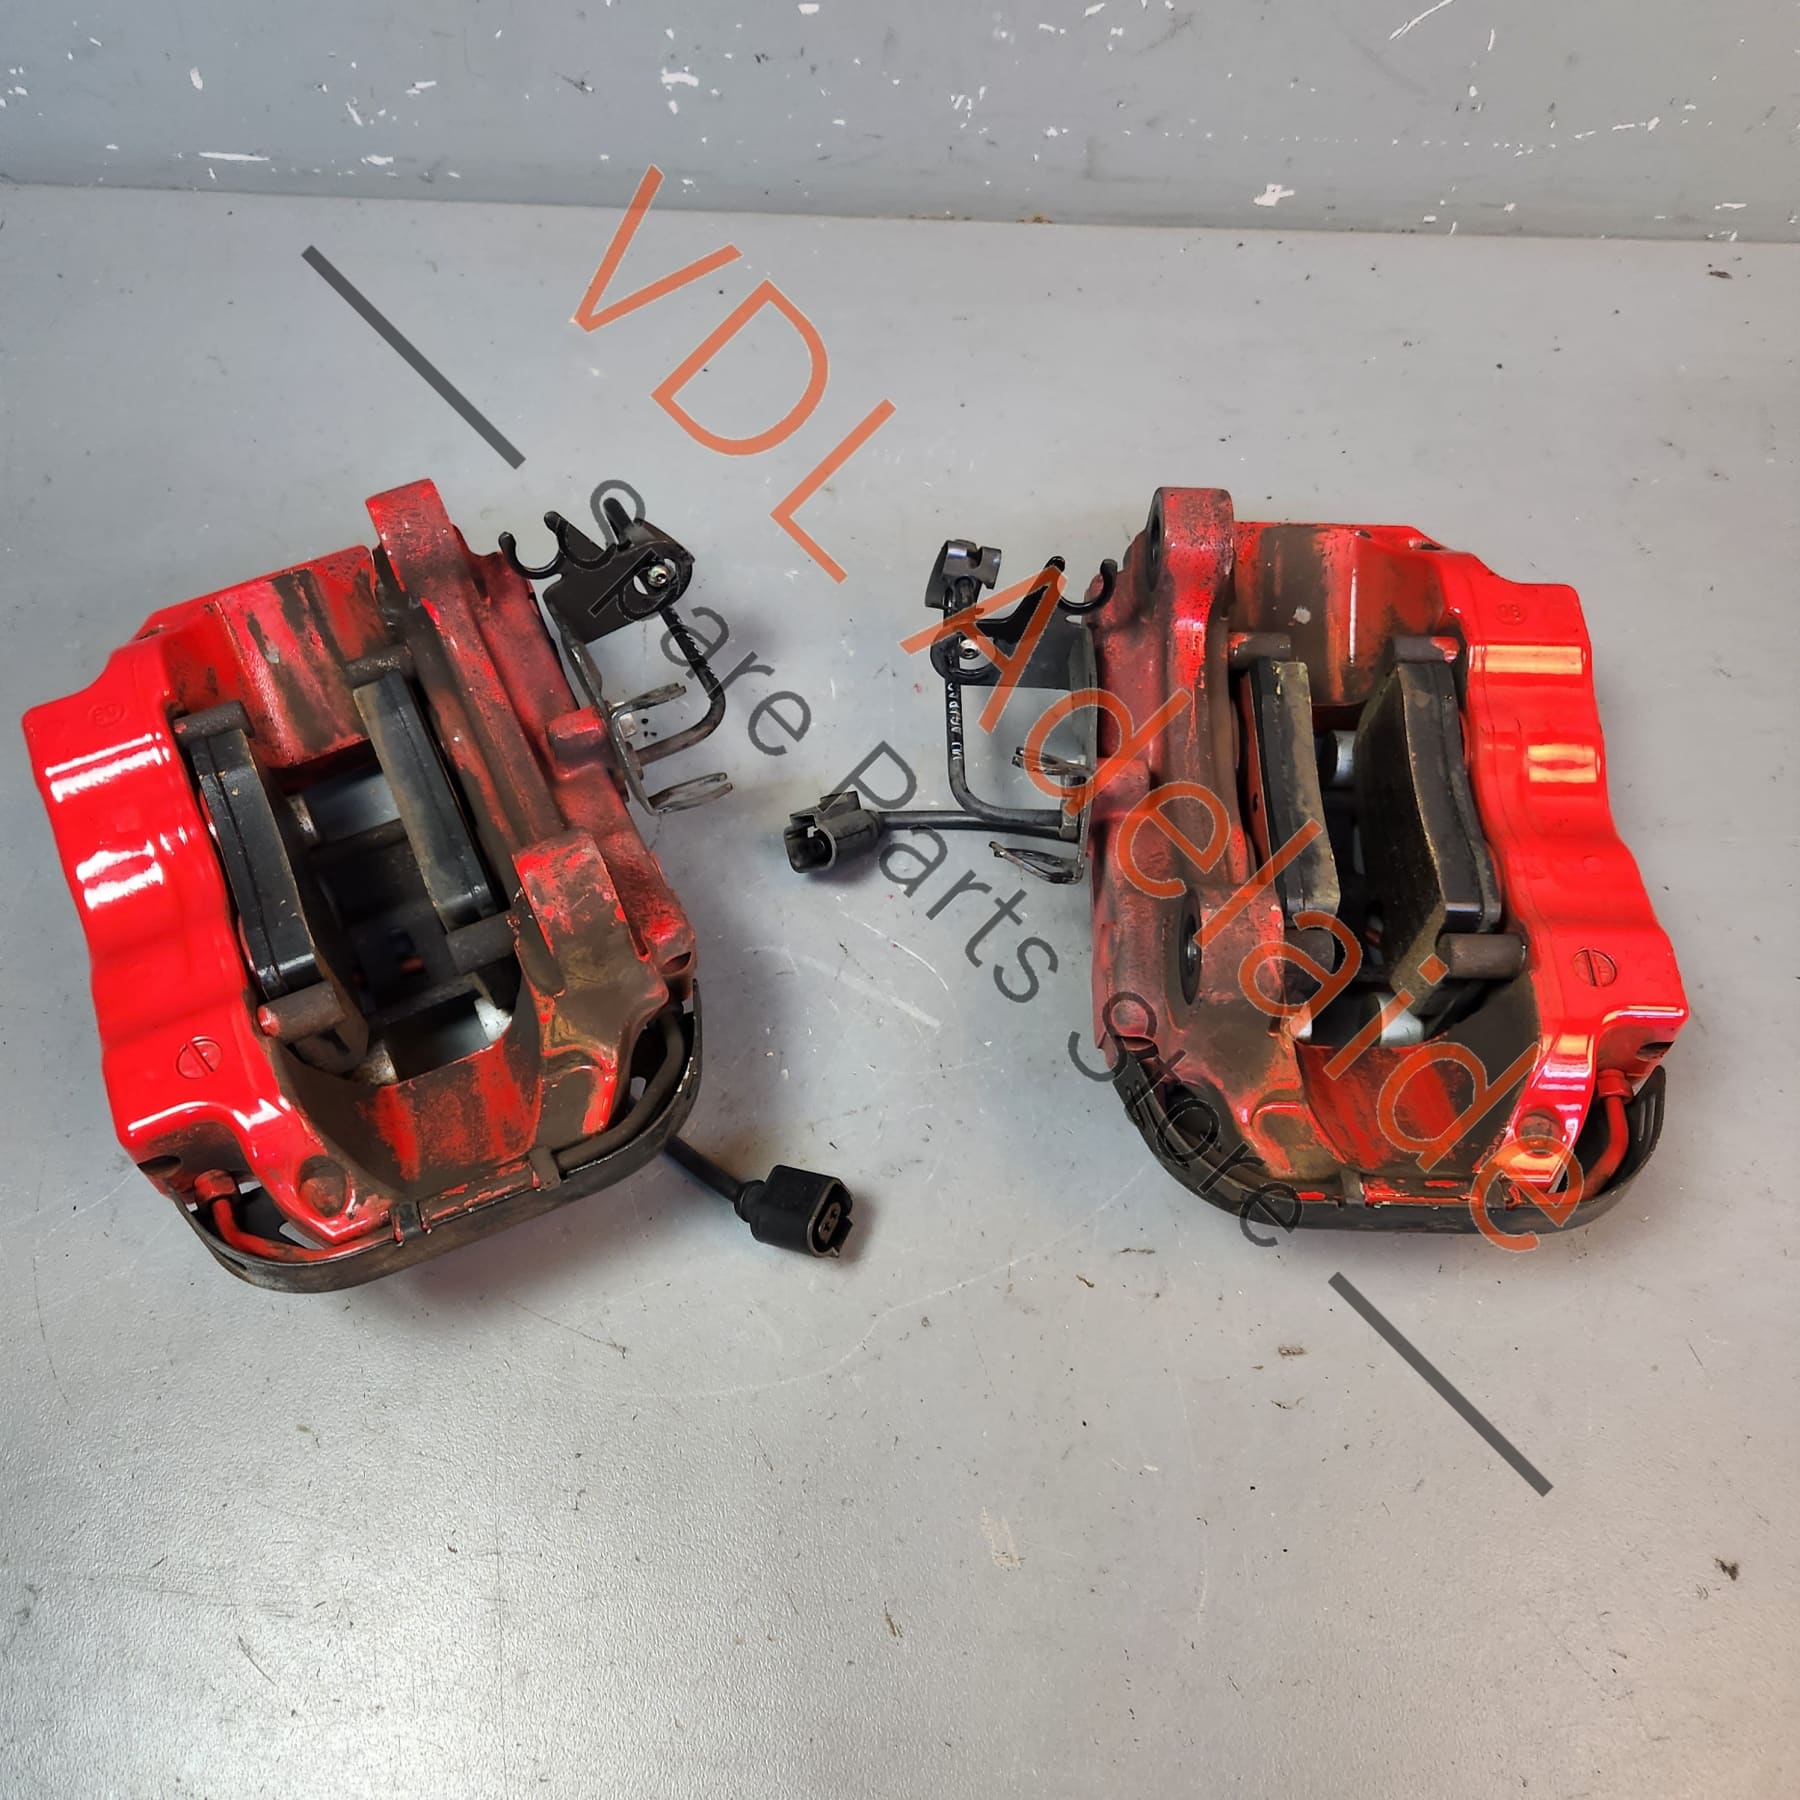 95535242151 95535242251   Pair of Porsche Cayenne GTS Rear Brembo 4x Piston Brake Calipers 18ZR Suit 330mm x28mm Rotor